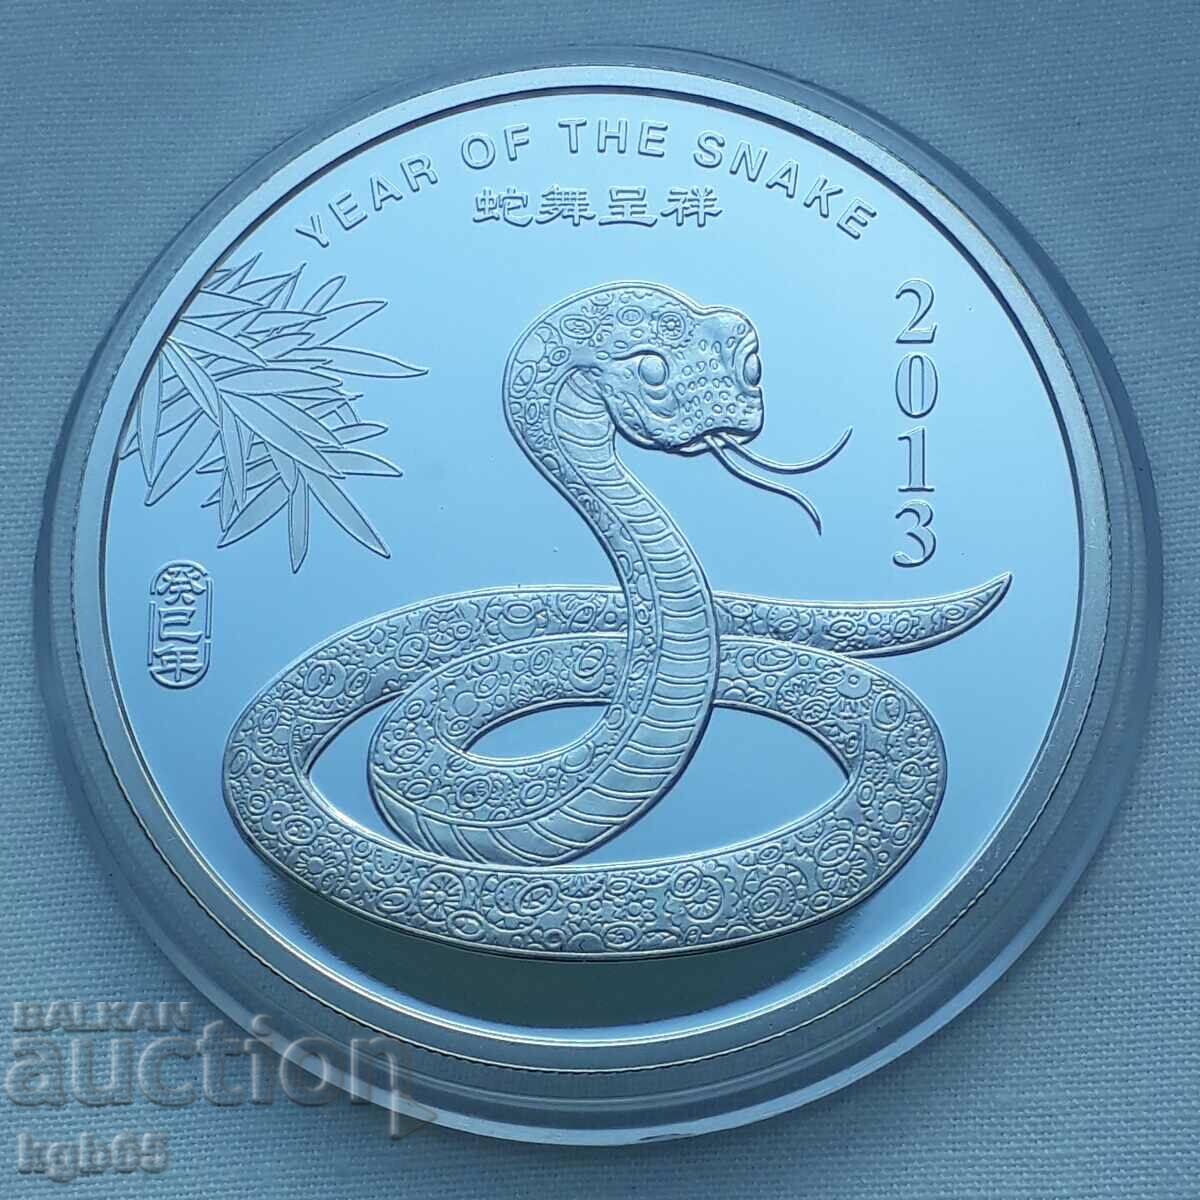 2 oz Silver 2013 Year of the Snake.